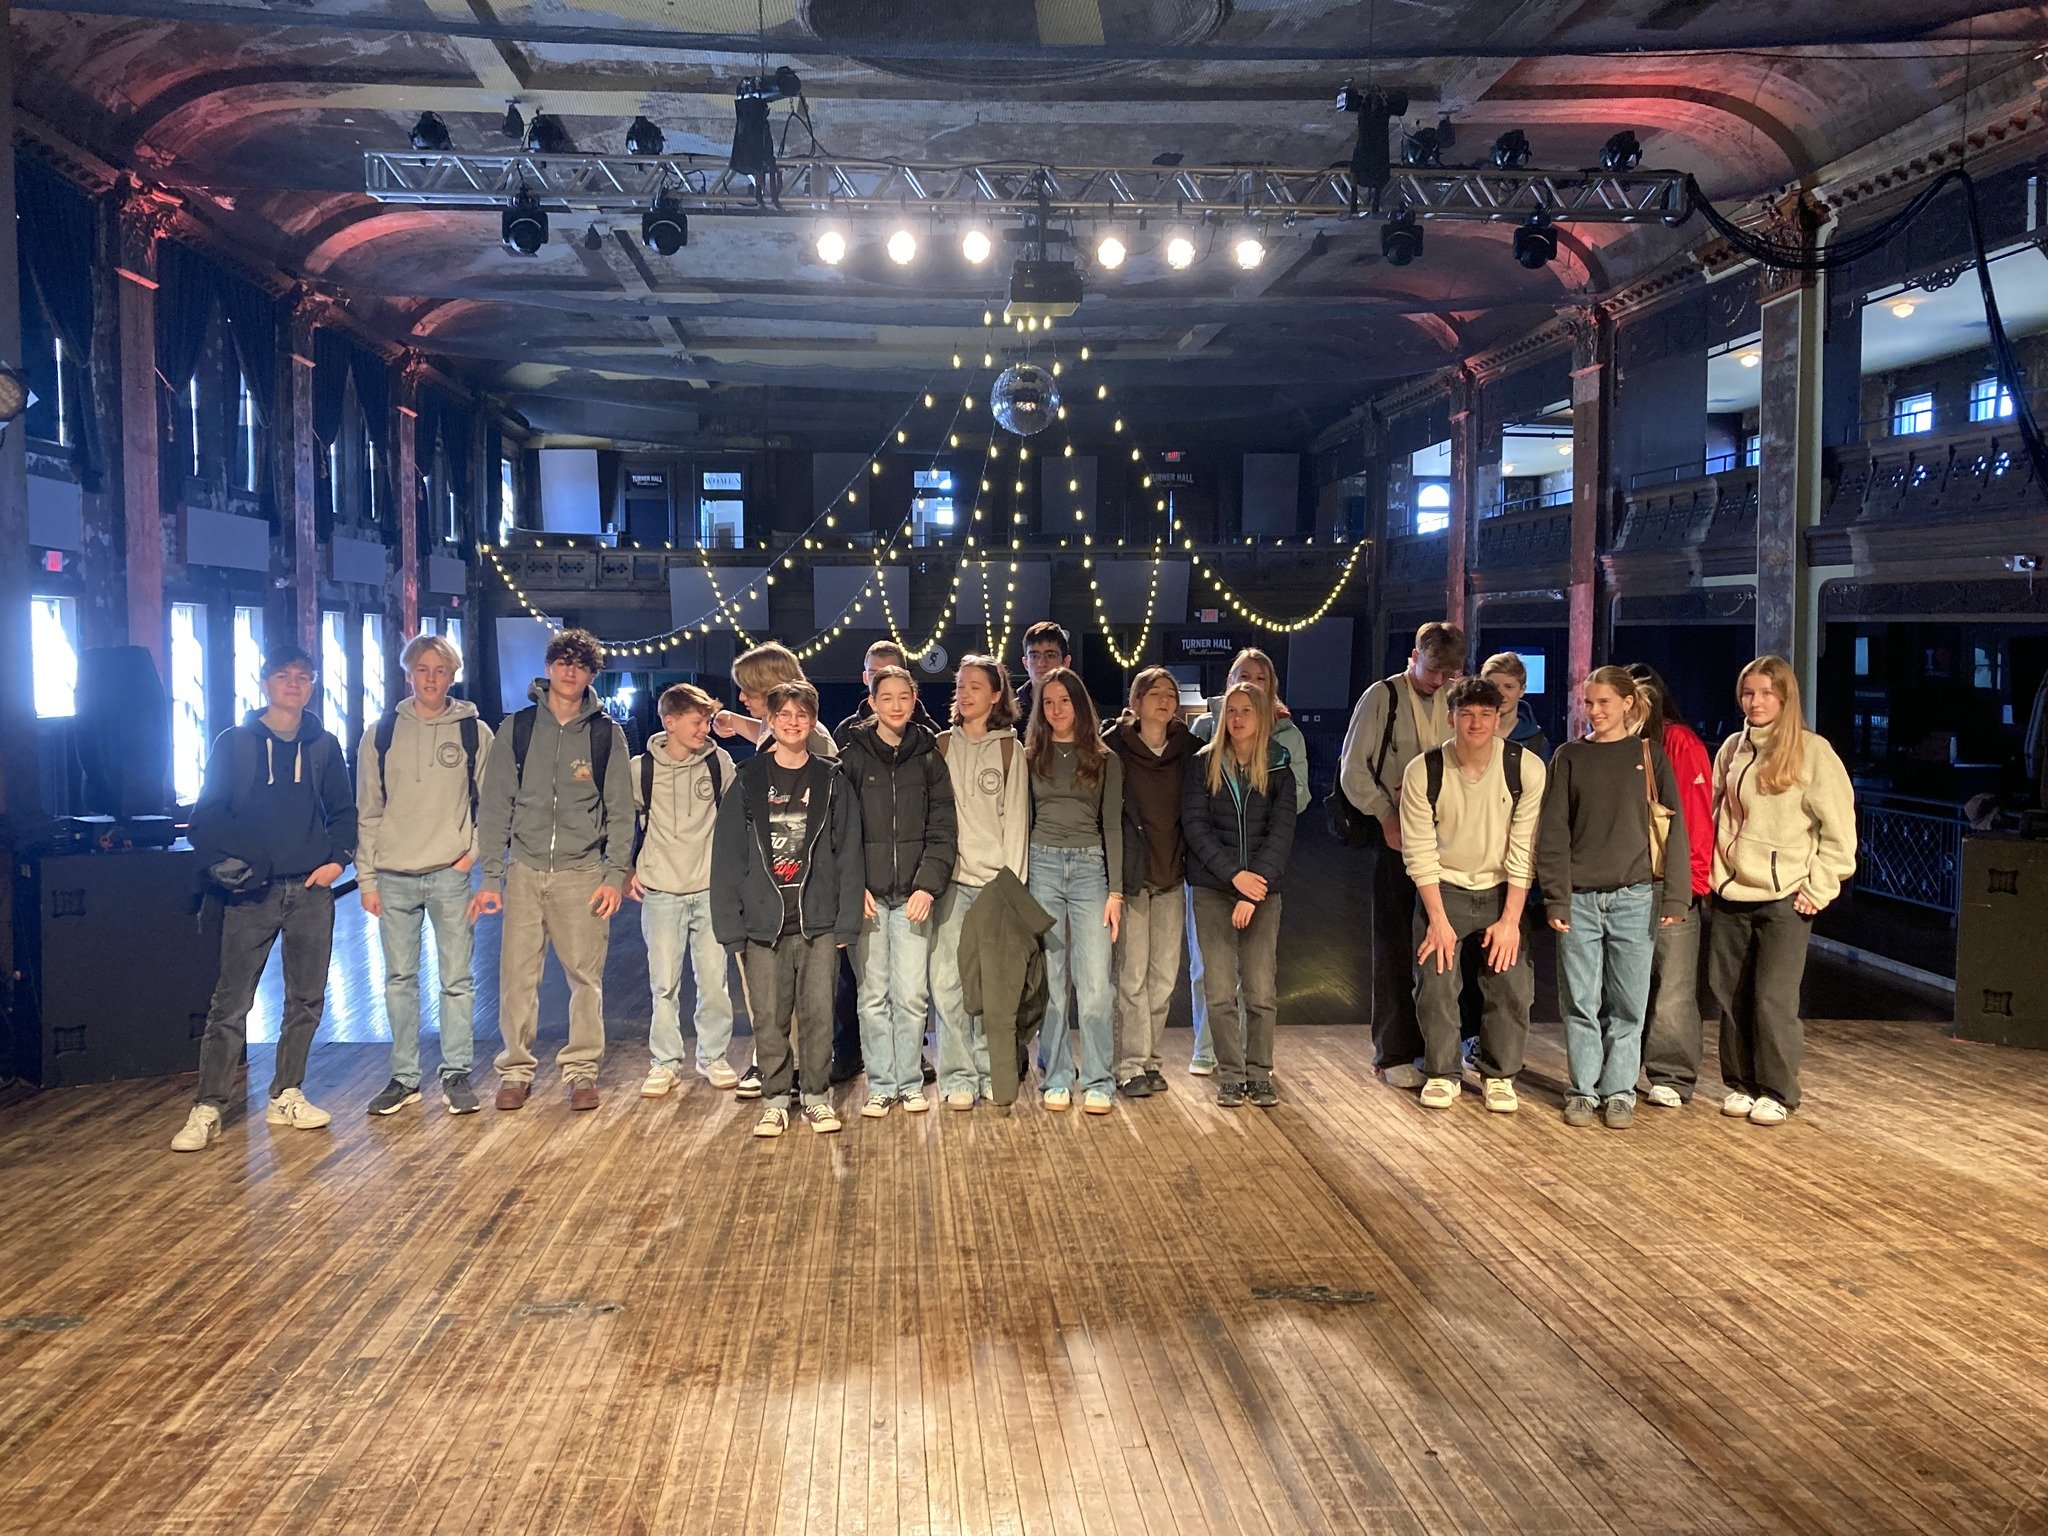 Today a group of U.S high school students from Germany and Germantown High School visited the Milwaukee Turners and received a walking tour of Milwaukee Turner Hall! If you would like to request a tour of our amazing building that has a concert ballr